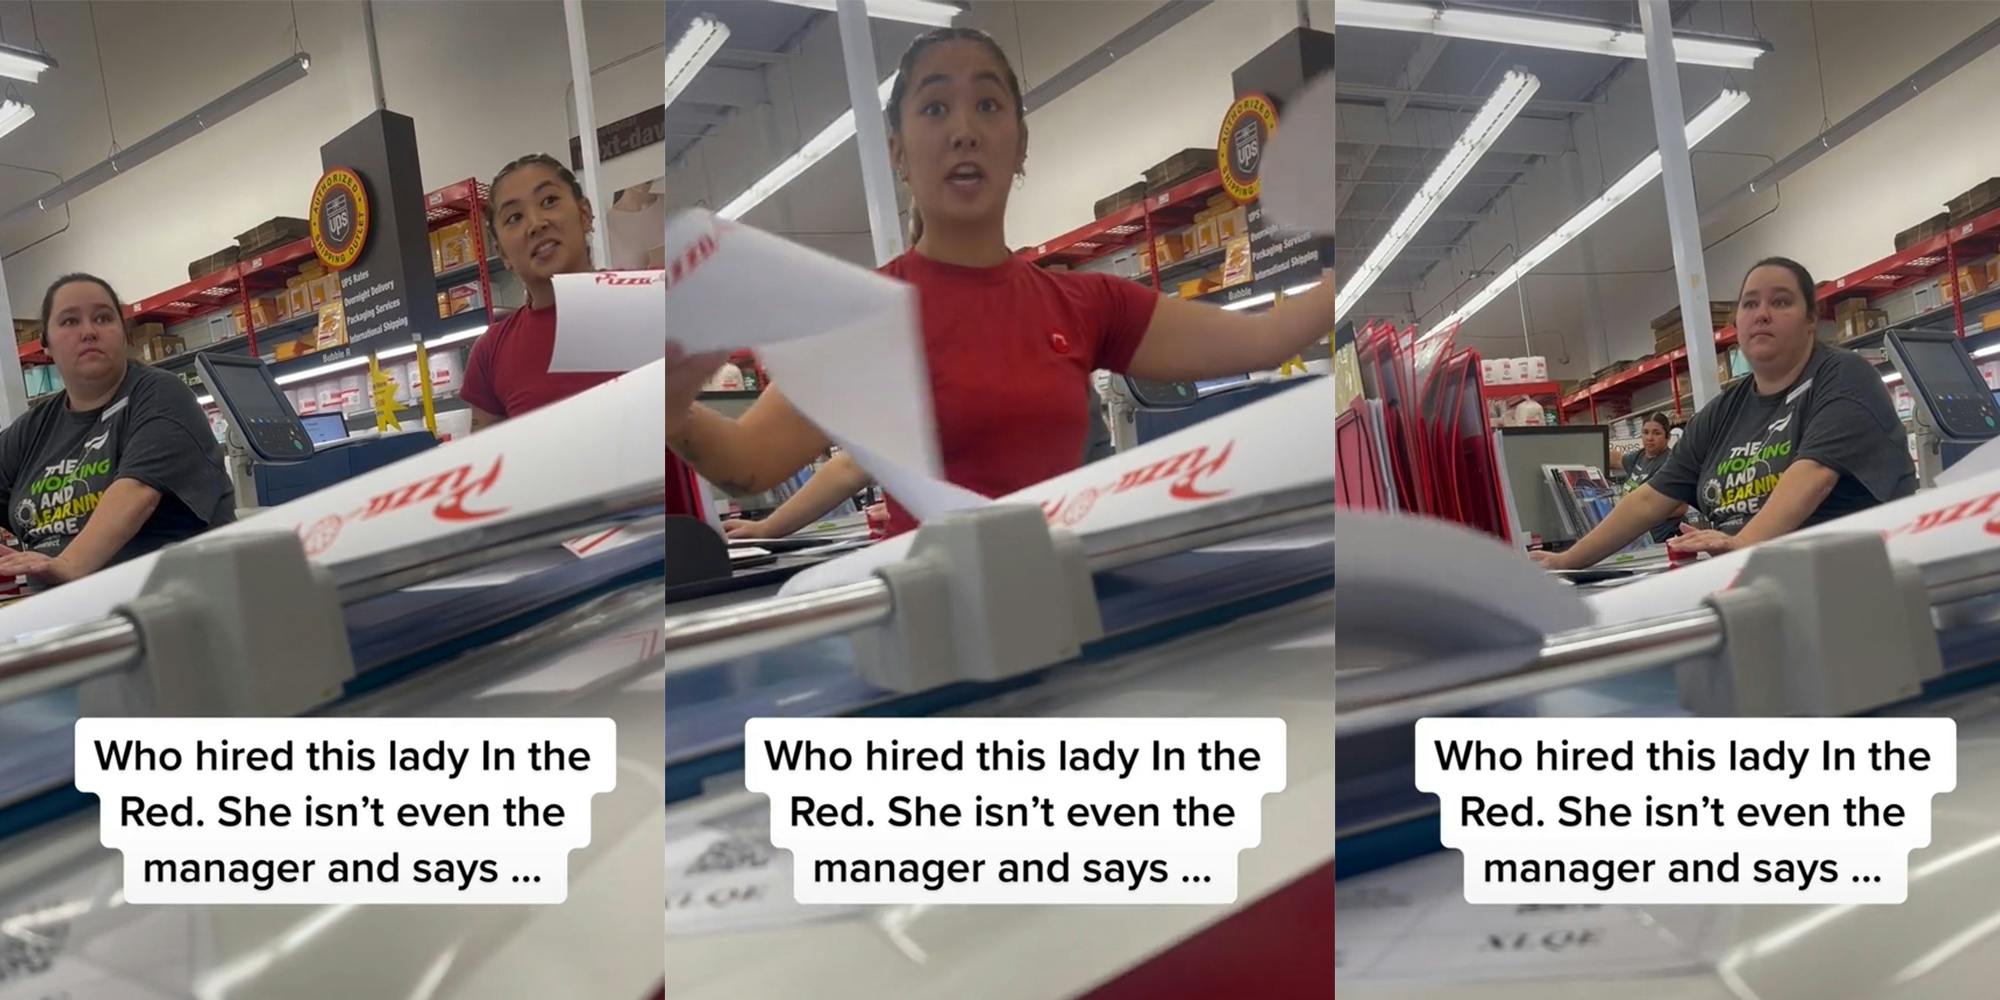 Staples employees with caption "Who hired this lady In the Red. She isn't even the manager and says..."